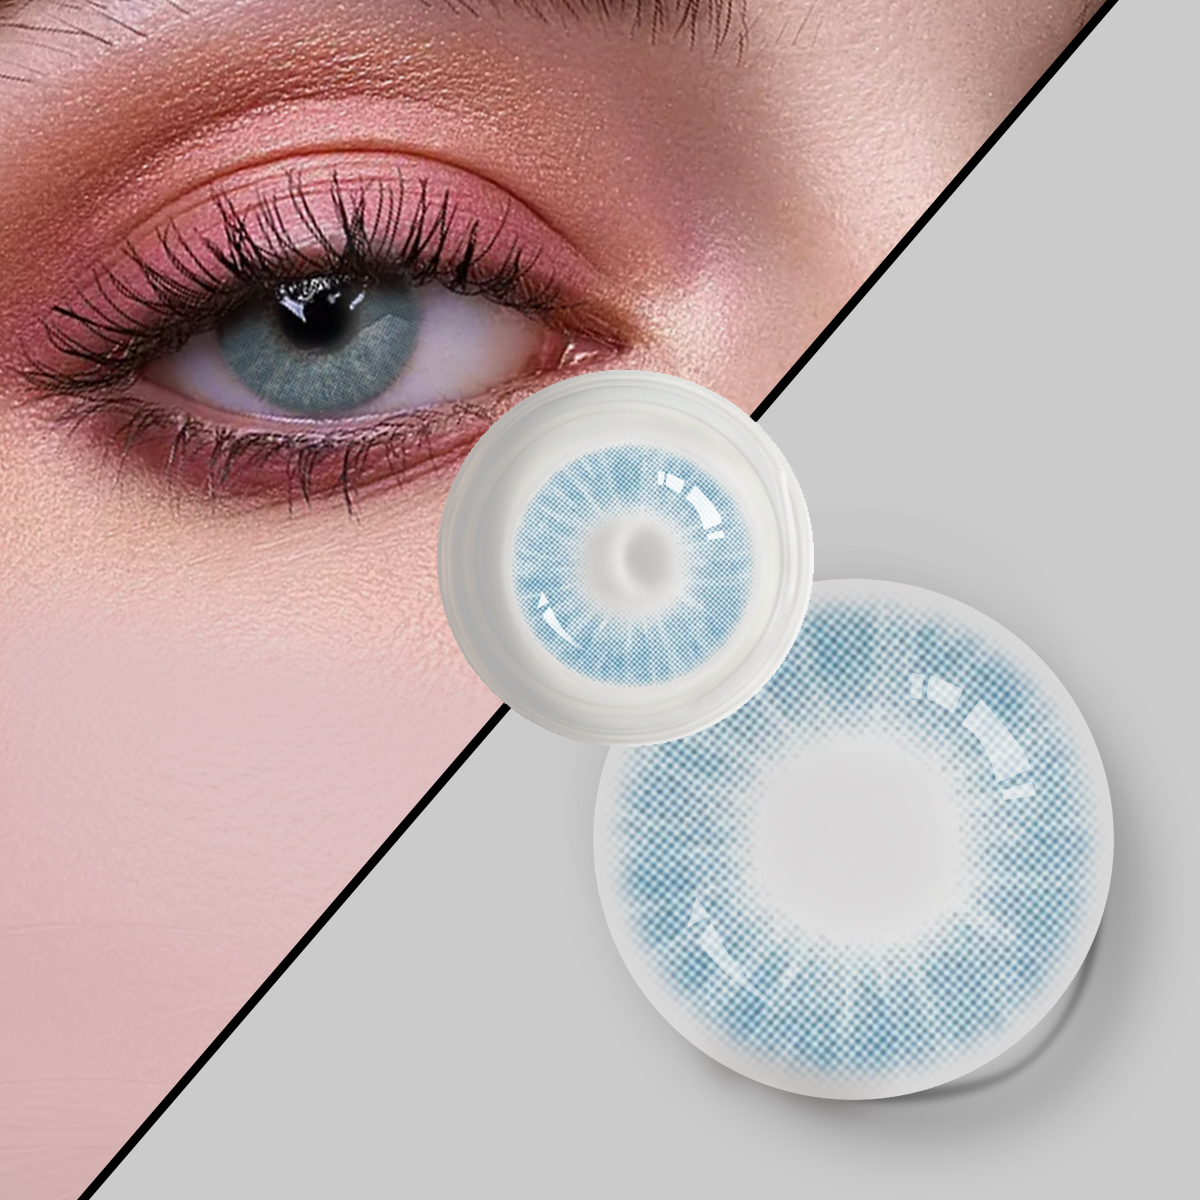 DBEYES Most Natural Colored Contact Lenses Magic Color Soft Contact Lens with Prescription Power Free Shipping